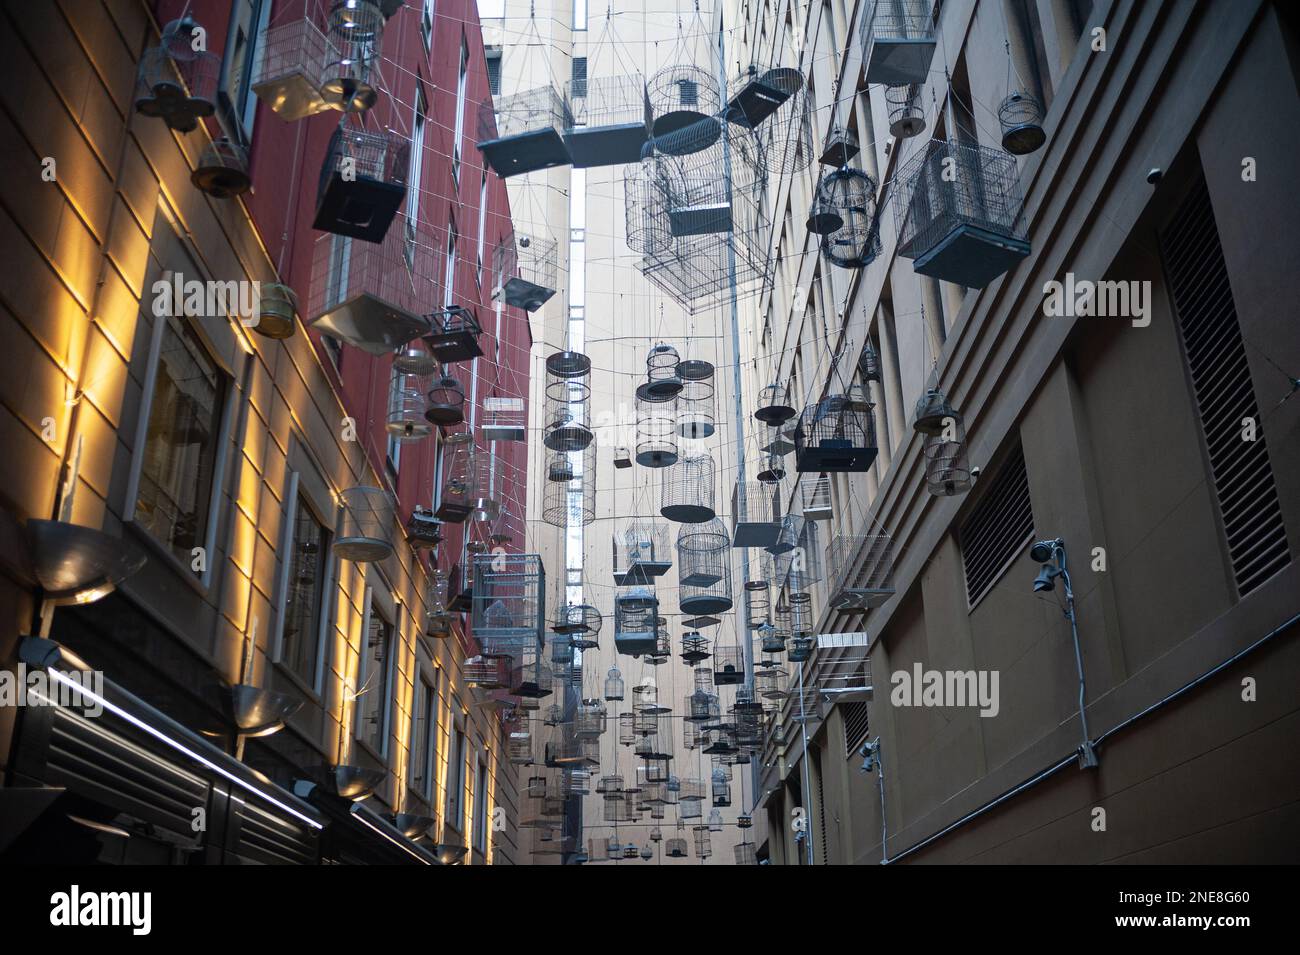 21.09.2019, Sydney, New South Wales, Australia - Art installation 'Forgotten Songs' in Angel Place of hanging birdcages commemorates former habitat. Stock Photo